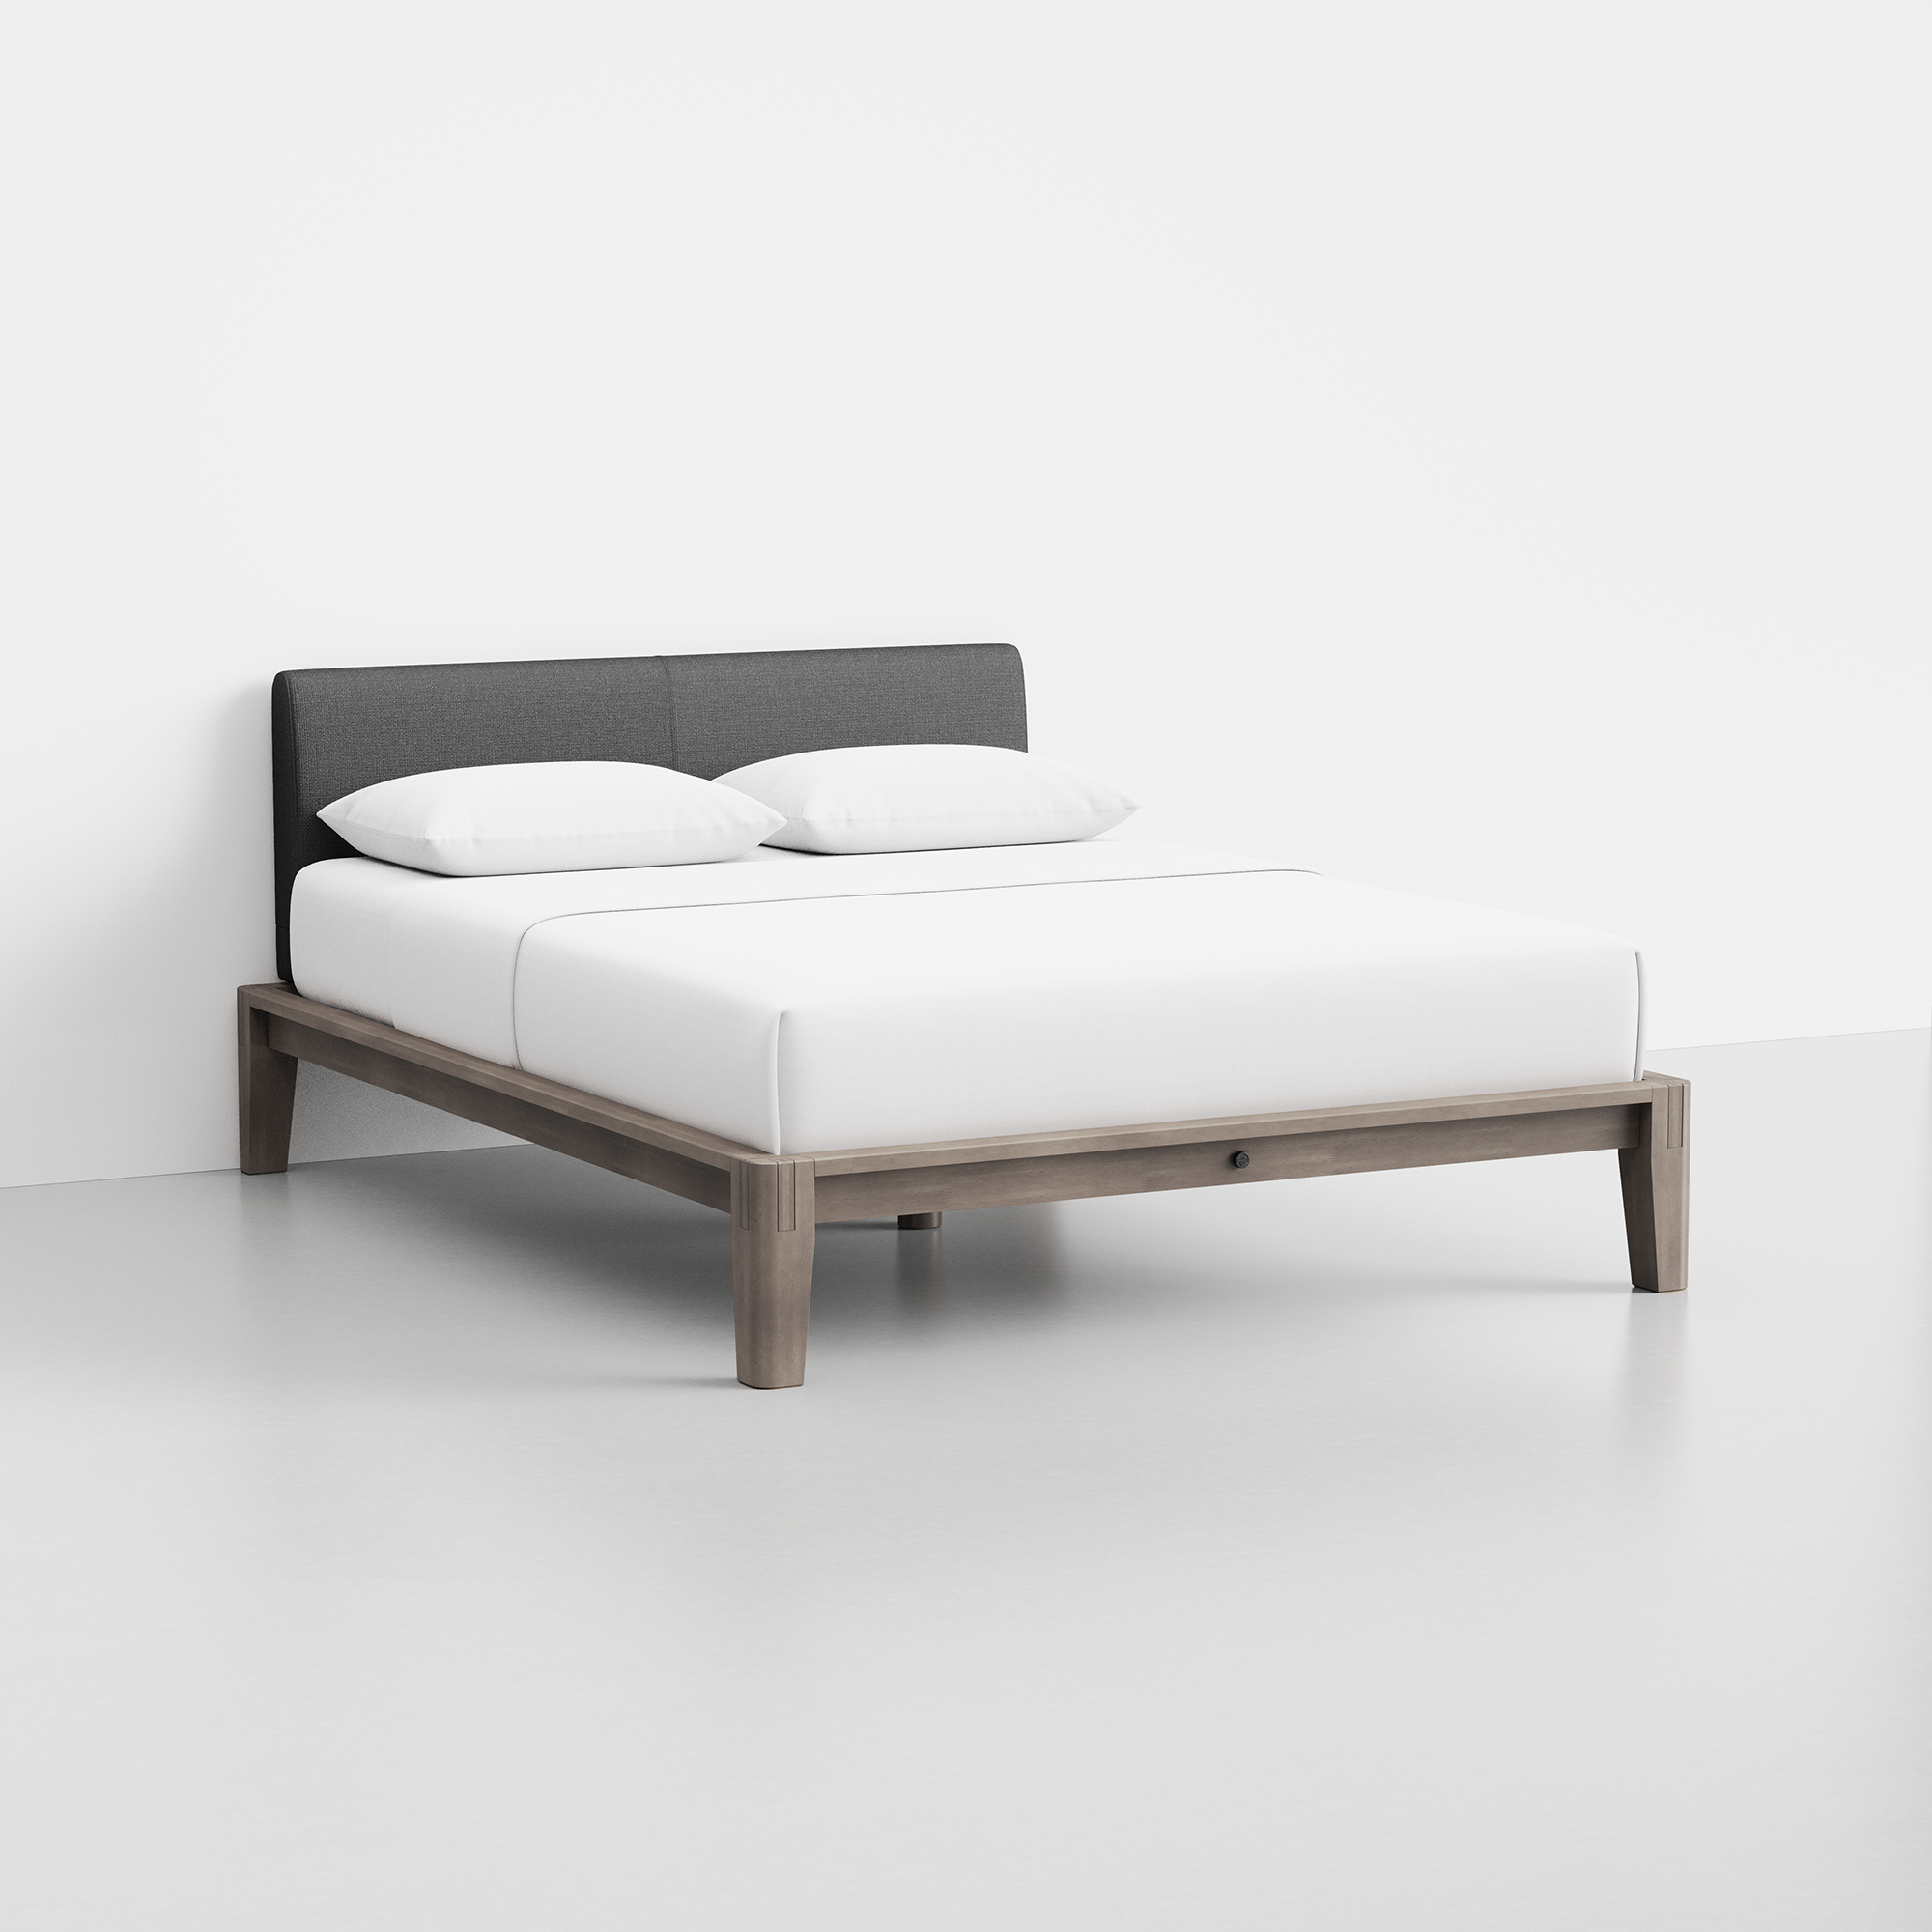 The Bed (Grey / Dark Charcoal) - Render - Angled